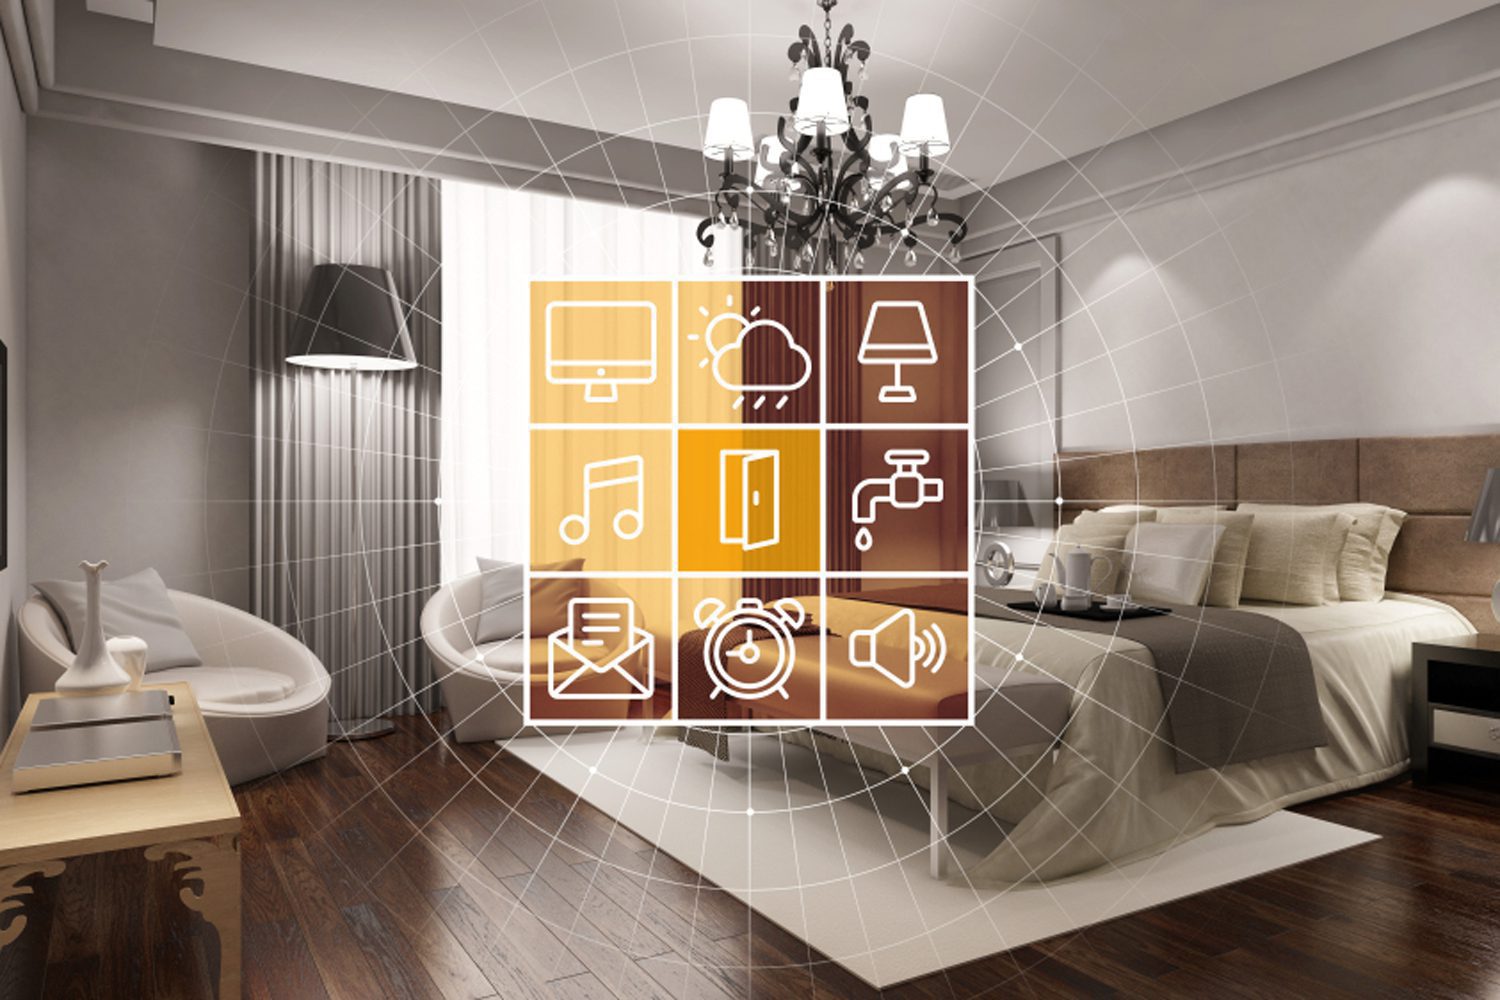 14 Technologies in the Hospitality Industry for Revenue Management